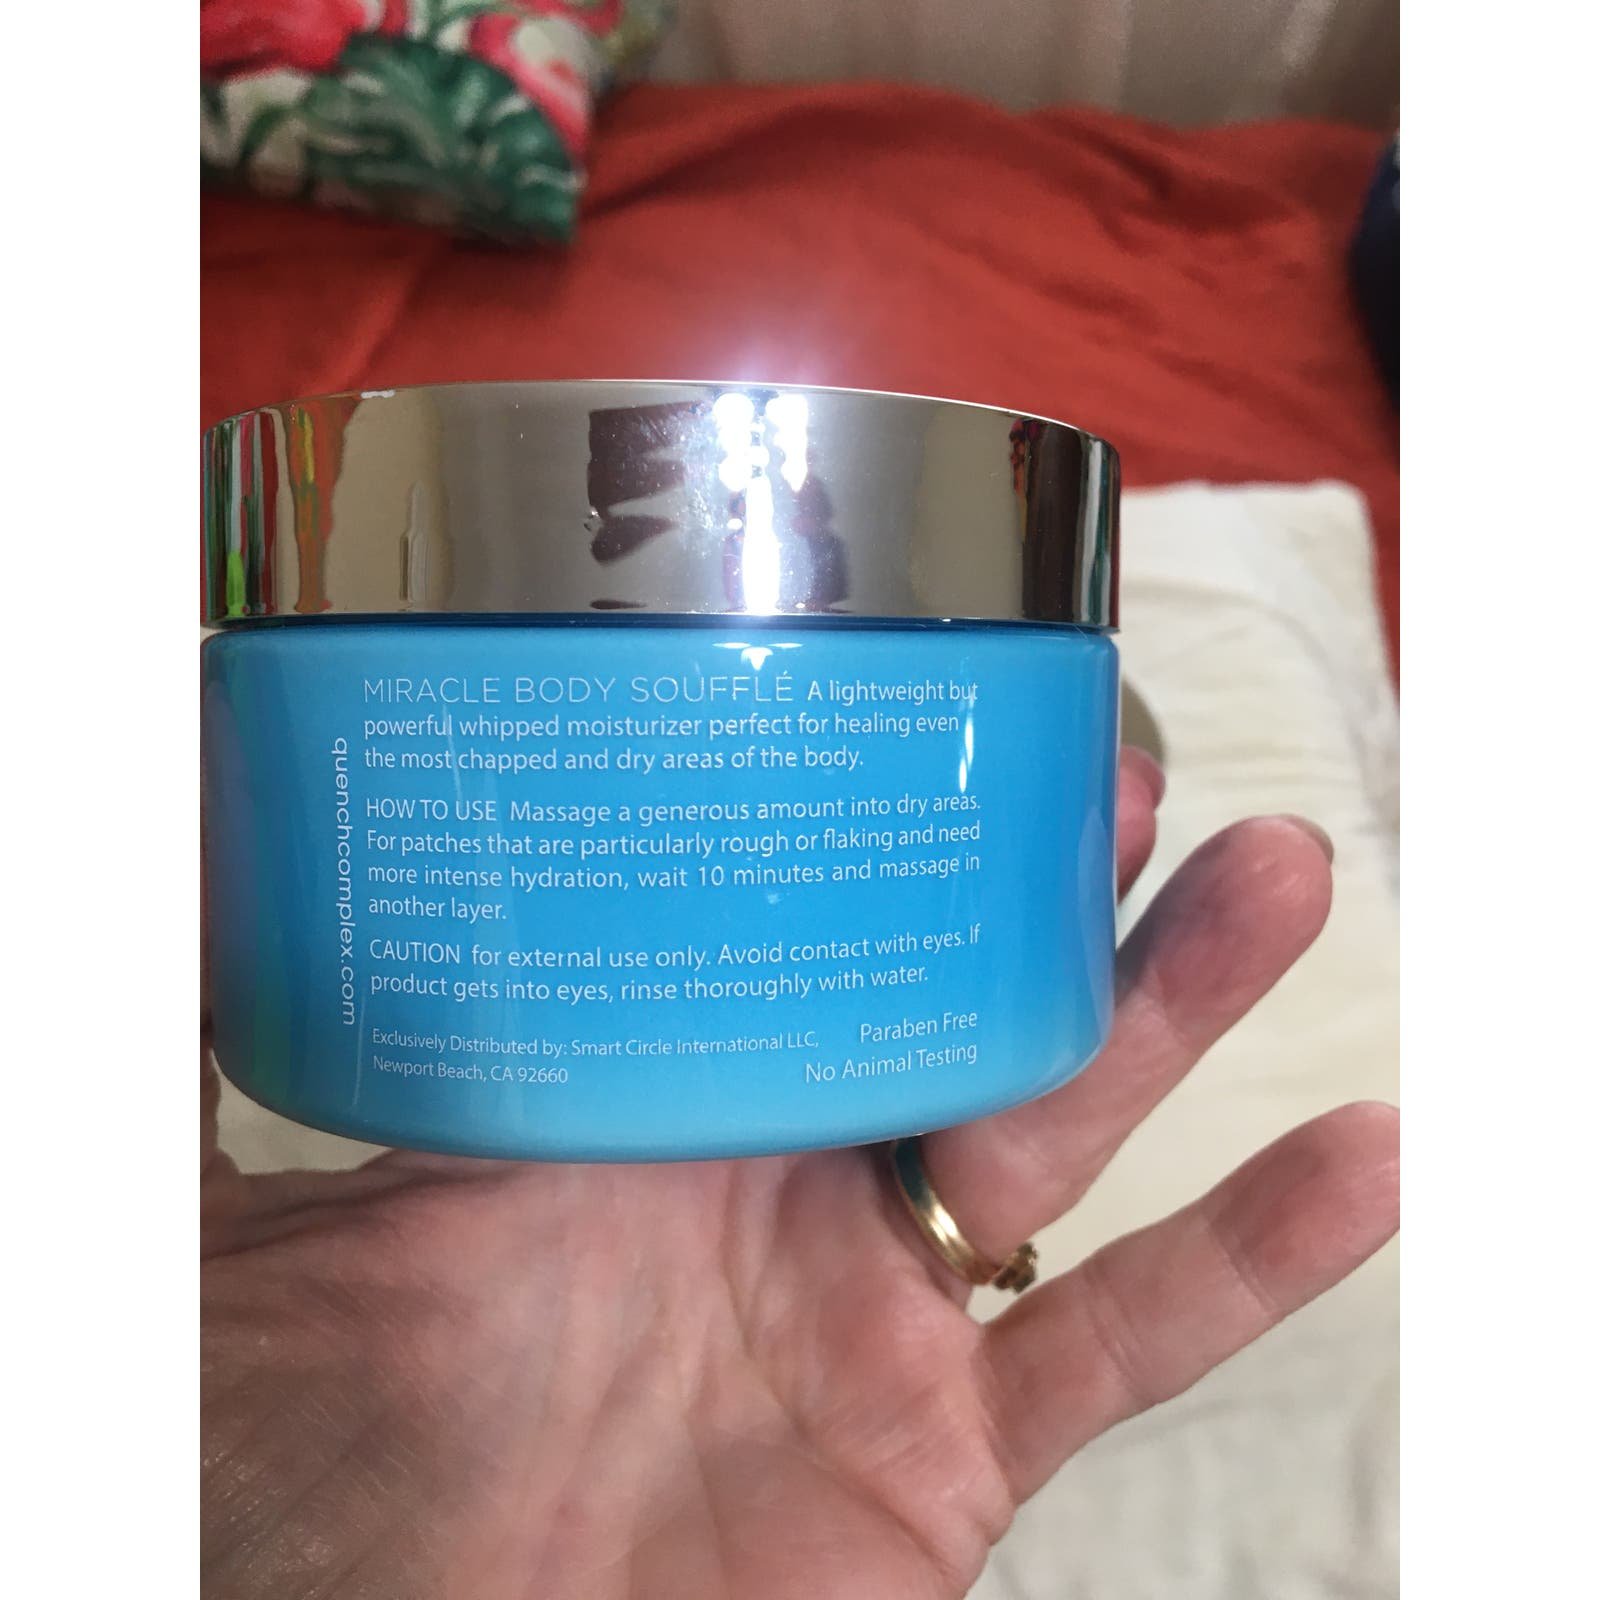 NWOT Never Opened, Quench Microwater Complex Miracle Body Scrub & Souffle´ AHvsb4DfS